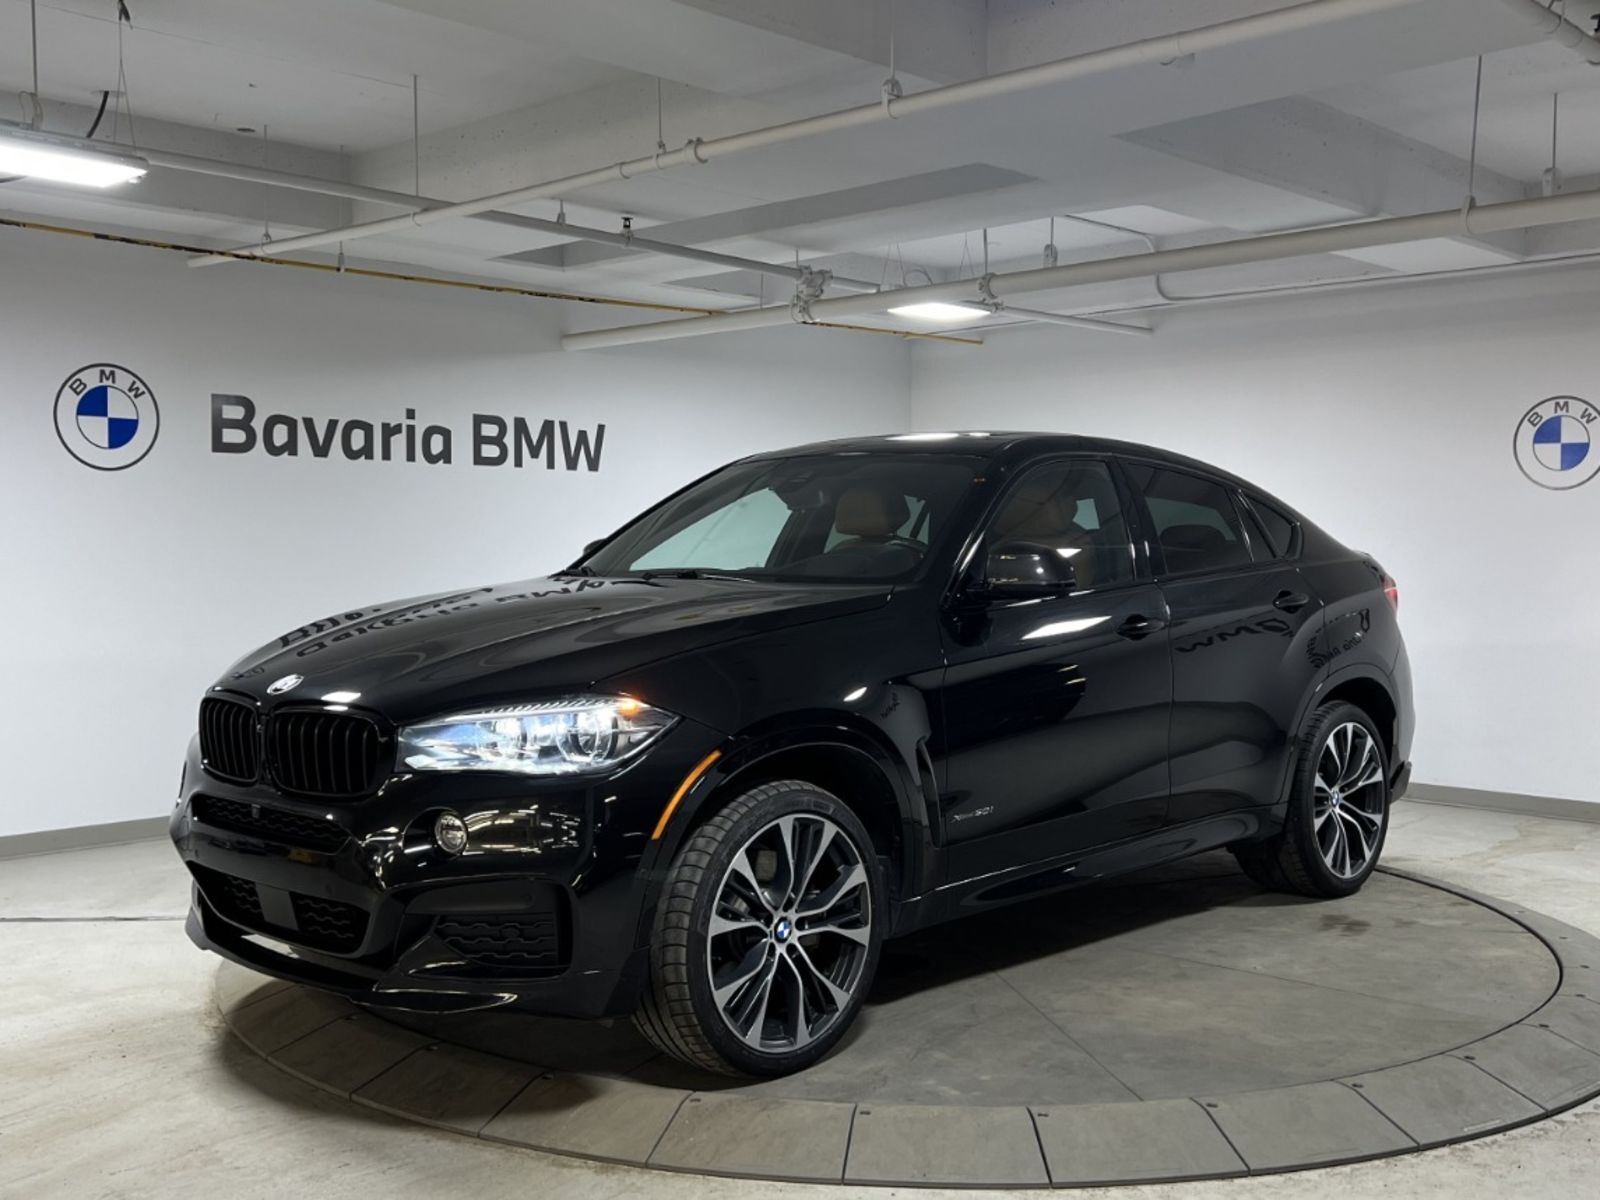 2019 BMW X6 xDrive50i | M Sport | Ultimate Package | Sunroof